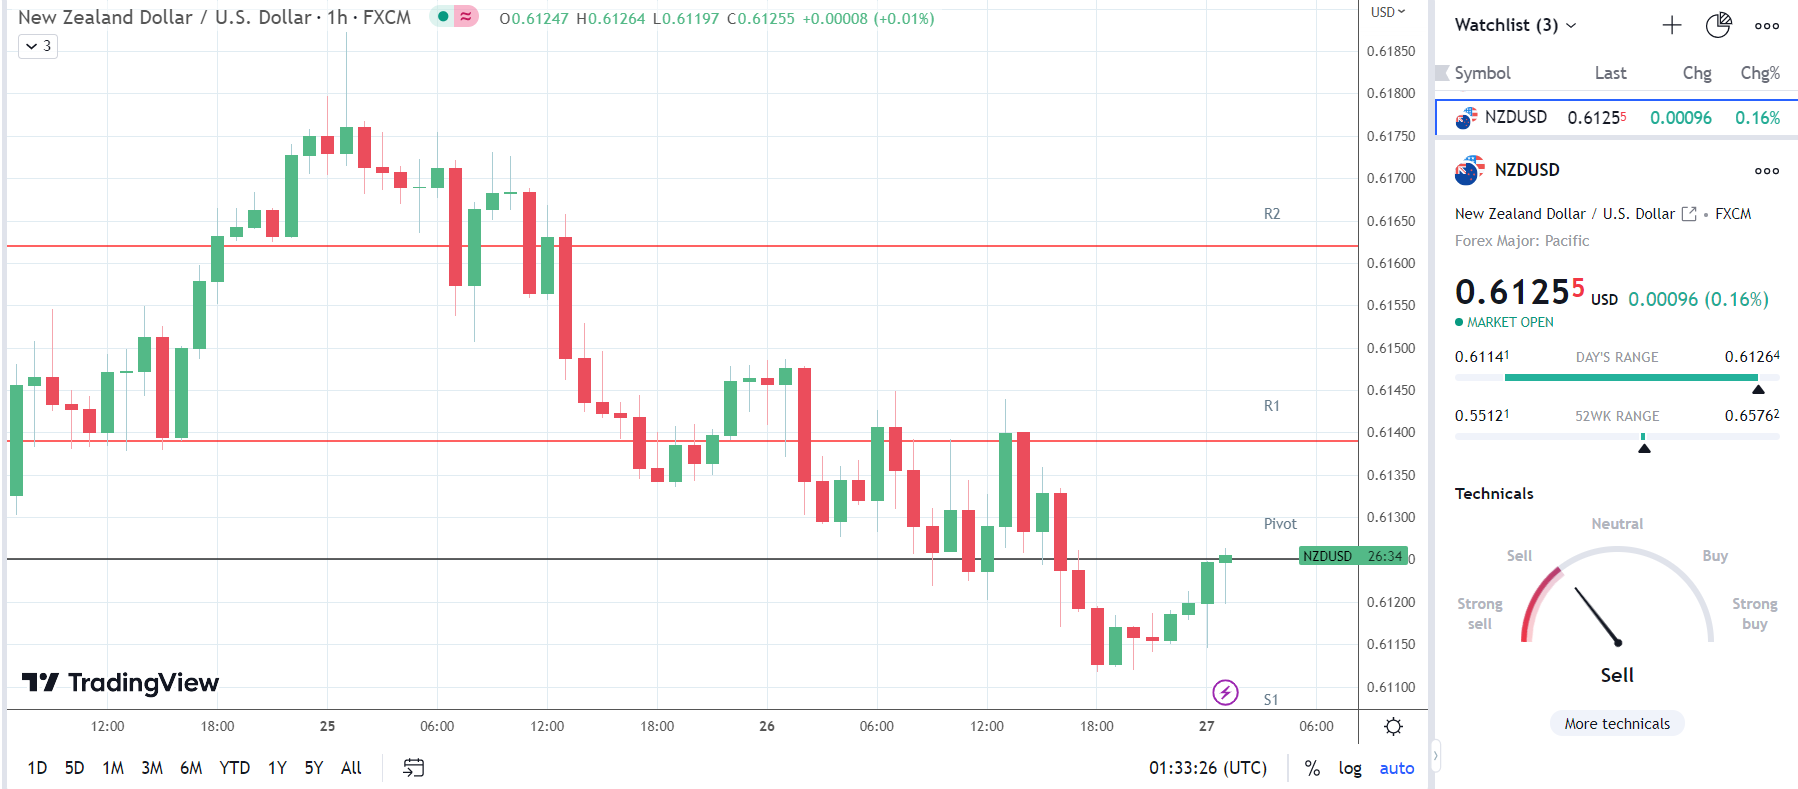 NZD/USD shows mixed reaction to business confidence survey.